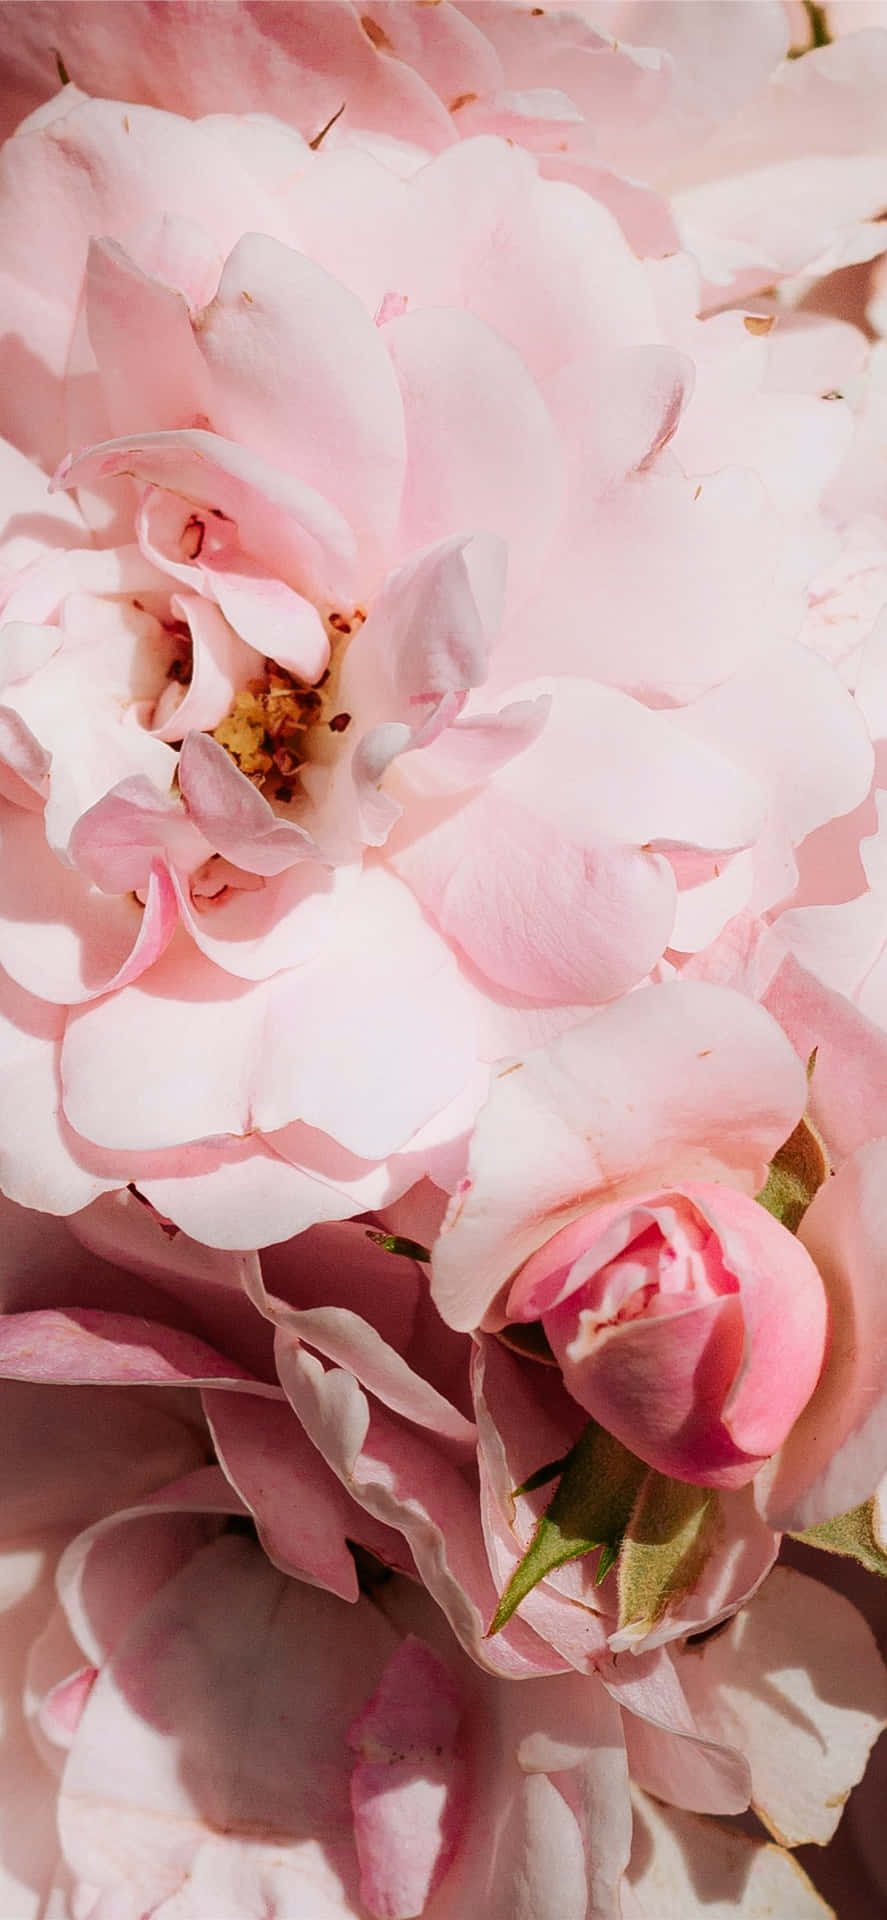 Unplug and enjoy the beauty of floral art with this pink floral iPhone wallpaper. Wallpaper